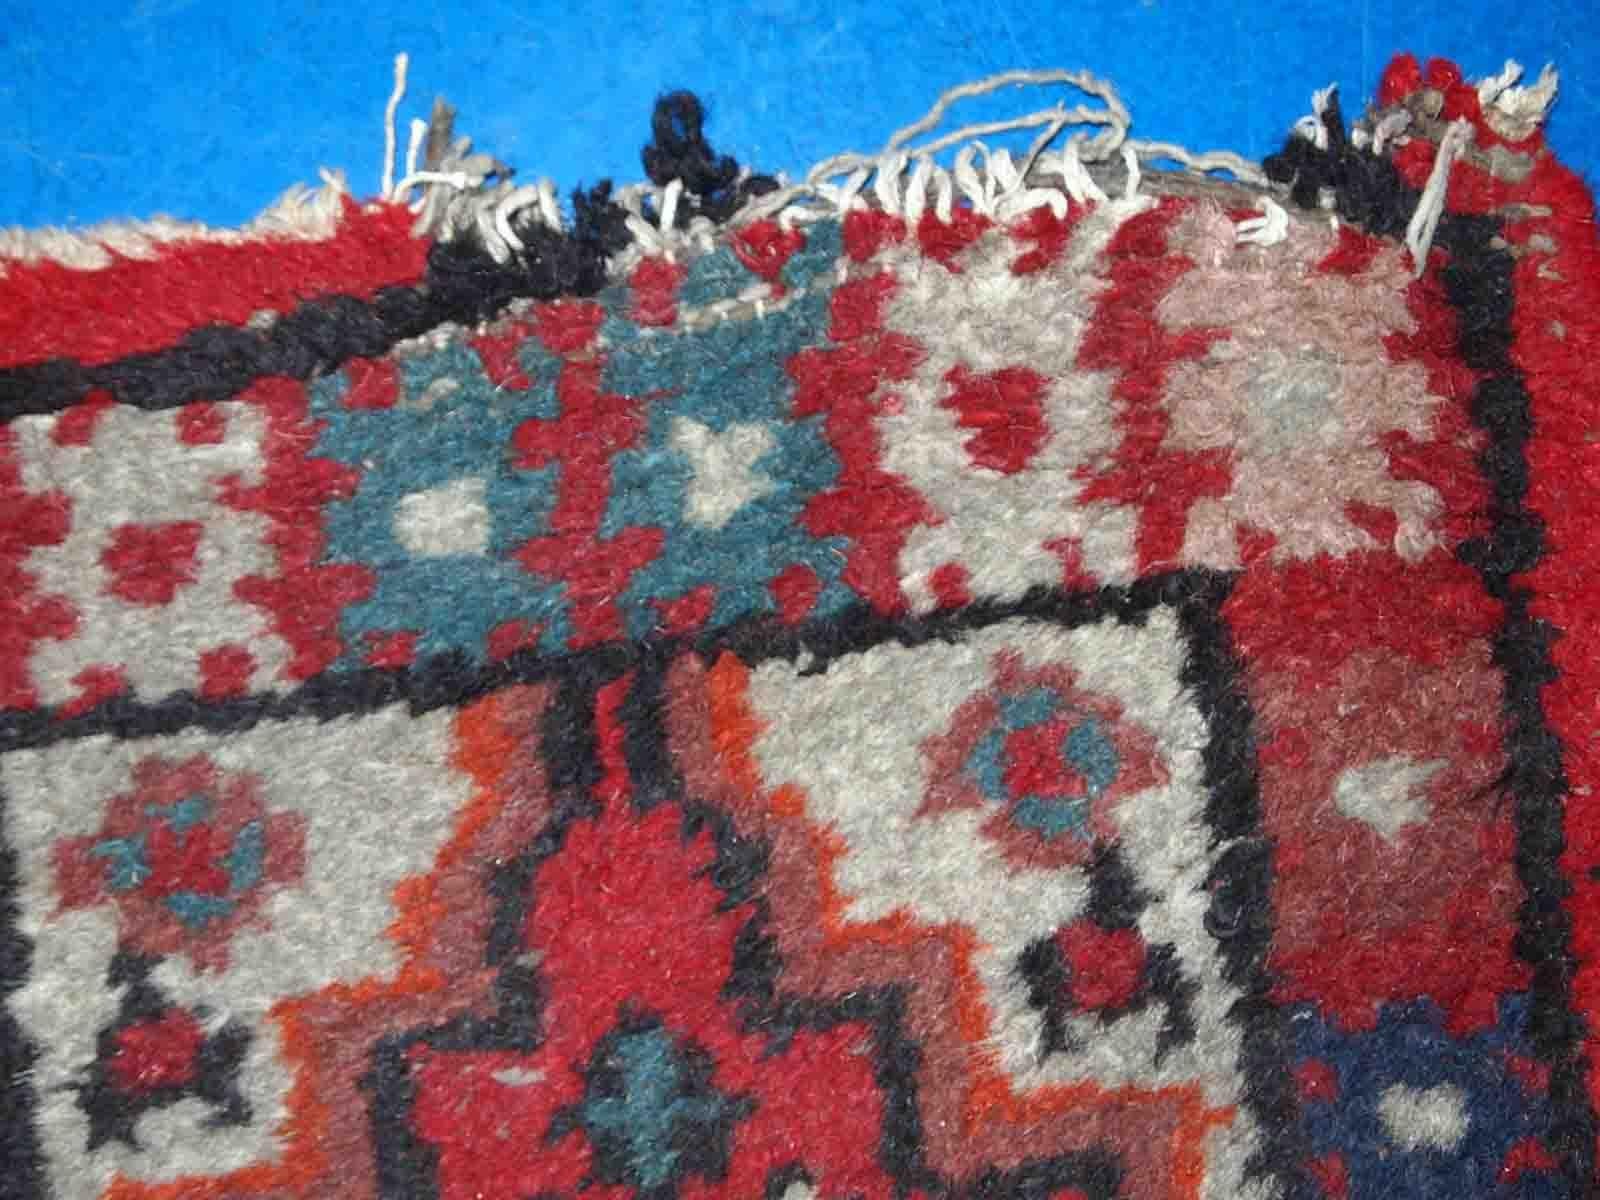 Vintage handmade Middle Eastern mat in original condition, it has some age wear. The rug is from the end of 20th century.

-condition: original, some age wear,

-circa: 1960s,

-size: 1.4' x 2.2' (42cm x 68cm),

-material: wool,

-country